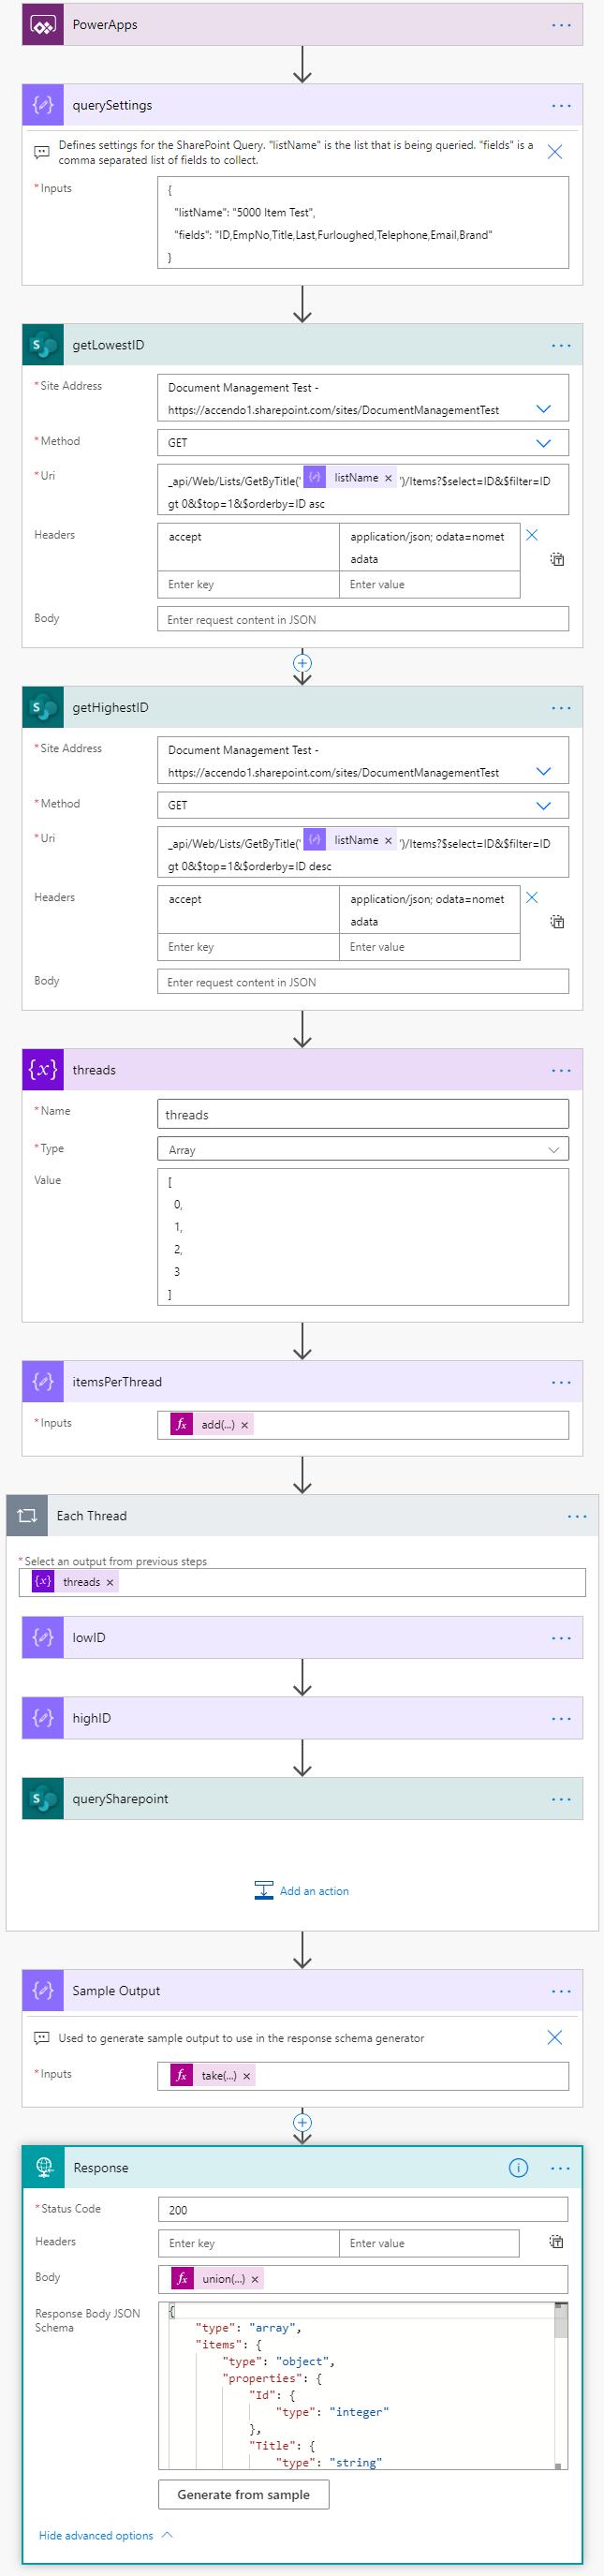 Super easy flow to get more than 5,000 items from a SharePoint list